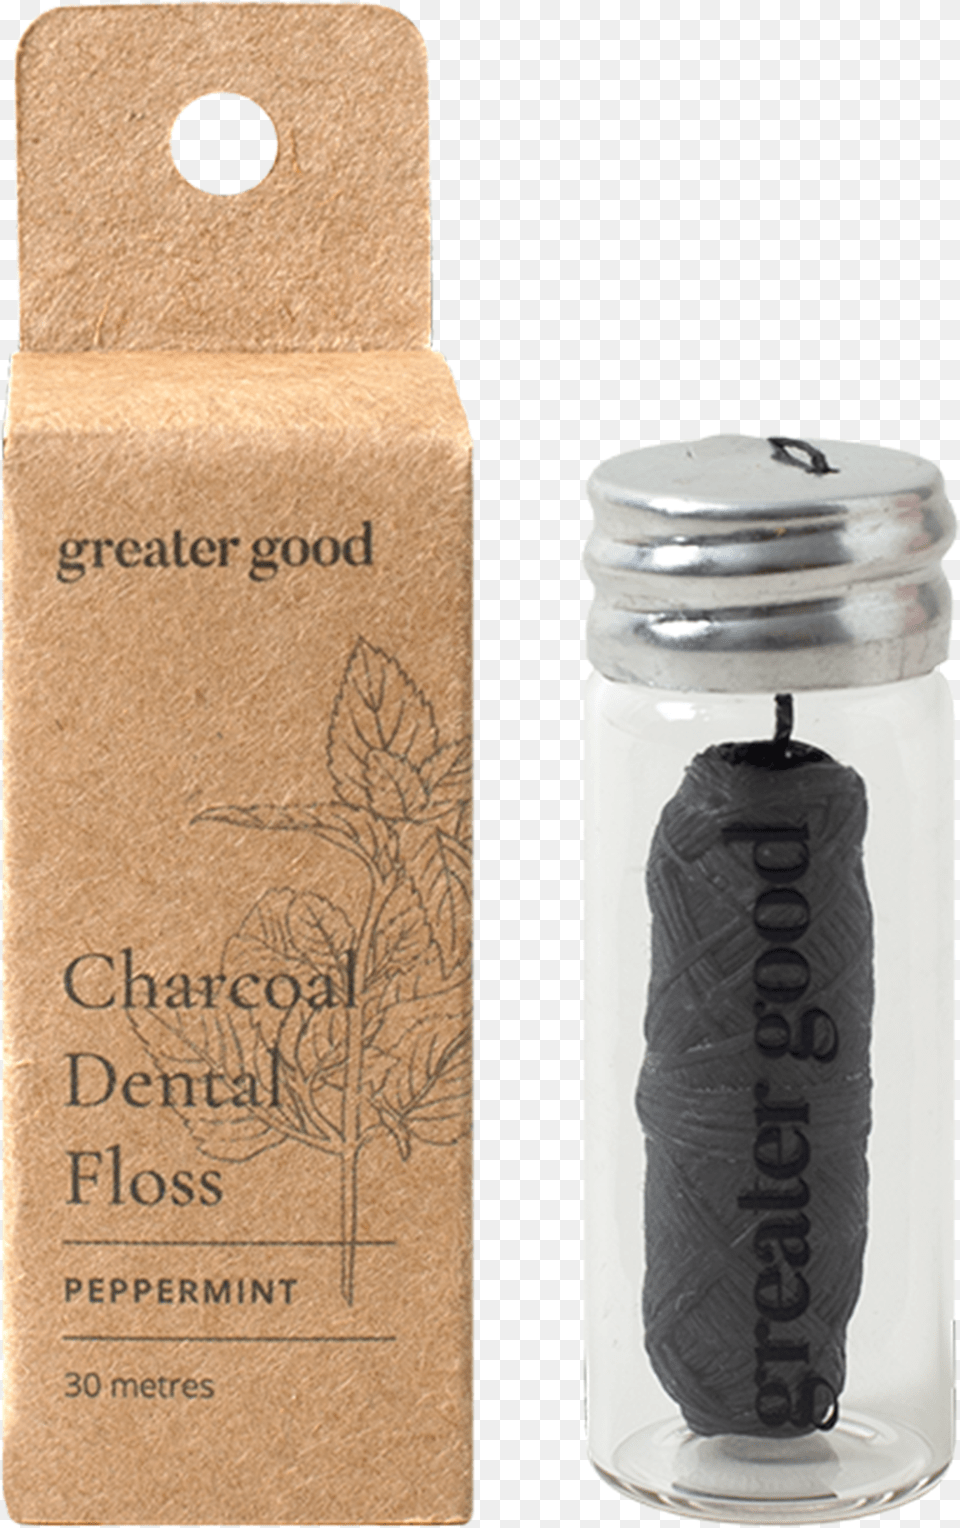 Class Lazyload Lazyload Mirage Cloudzoom Featured Image Glass Bottle, Jar, Beverage, Milk Free Png